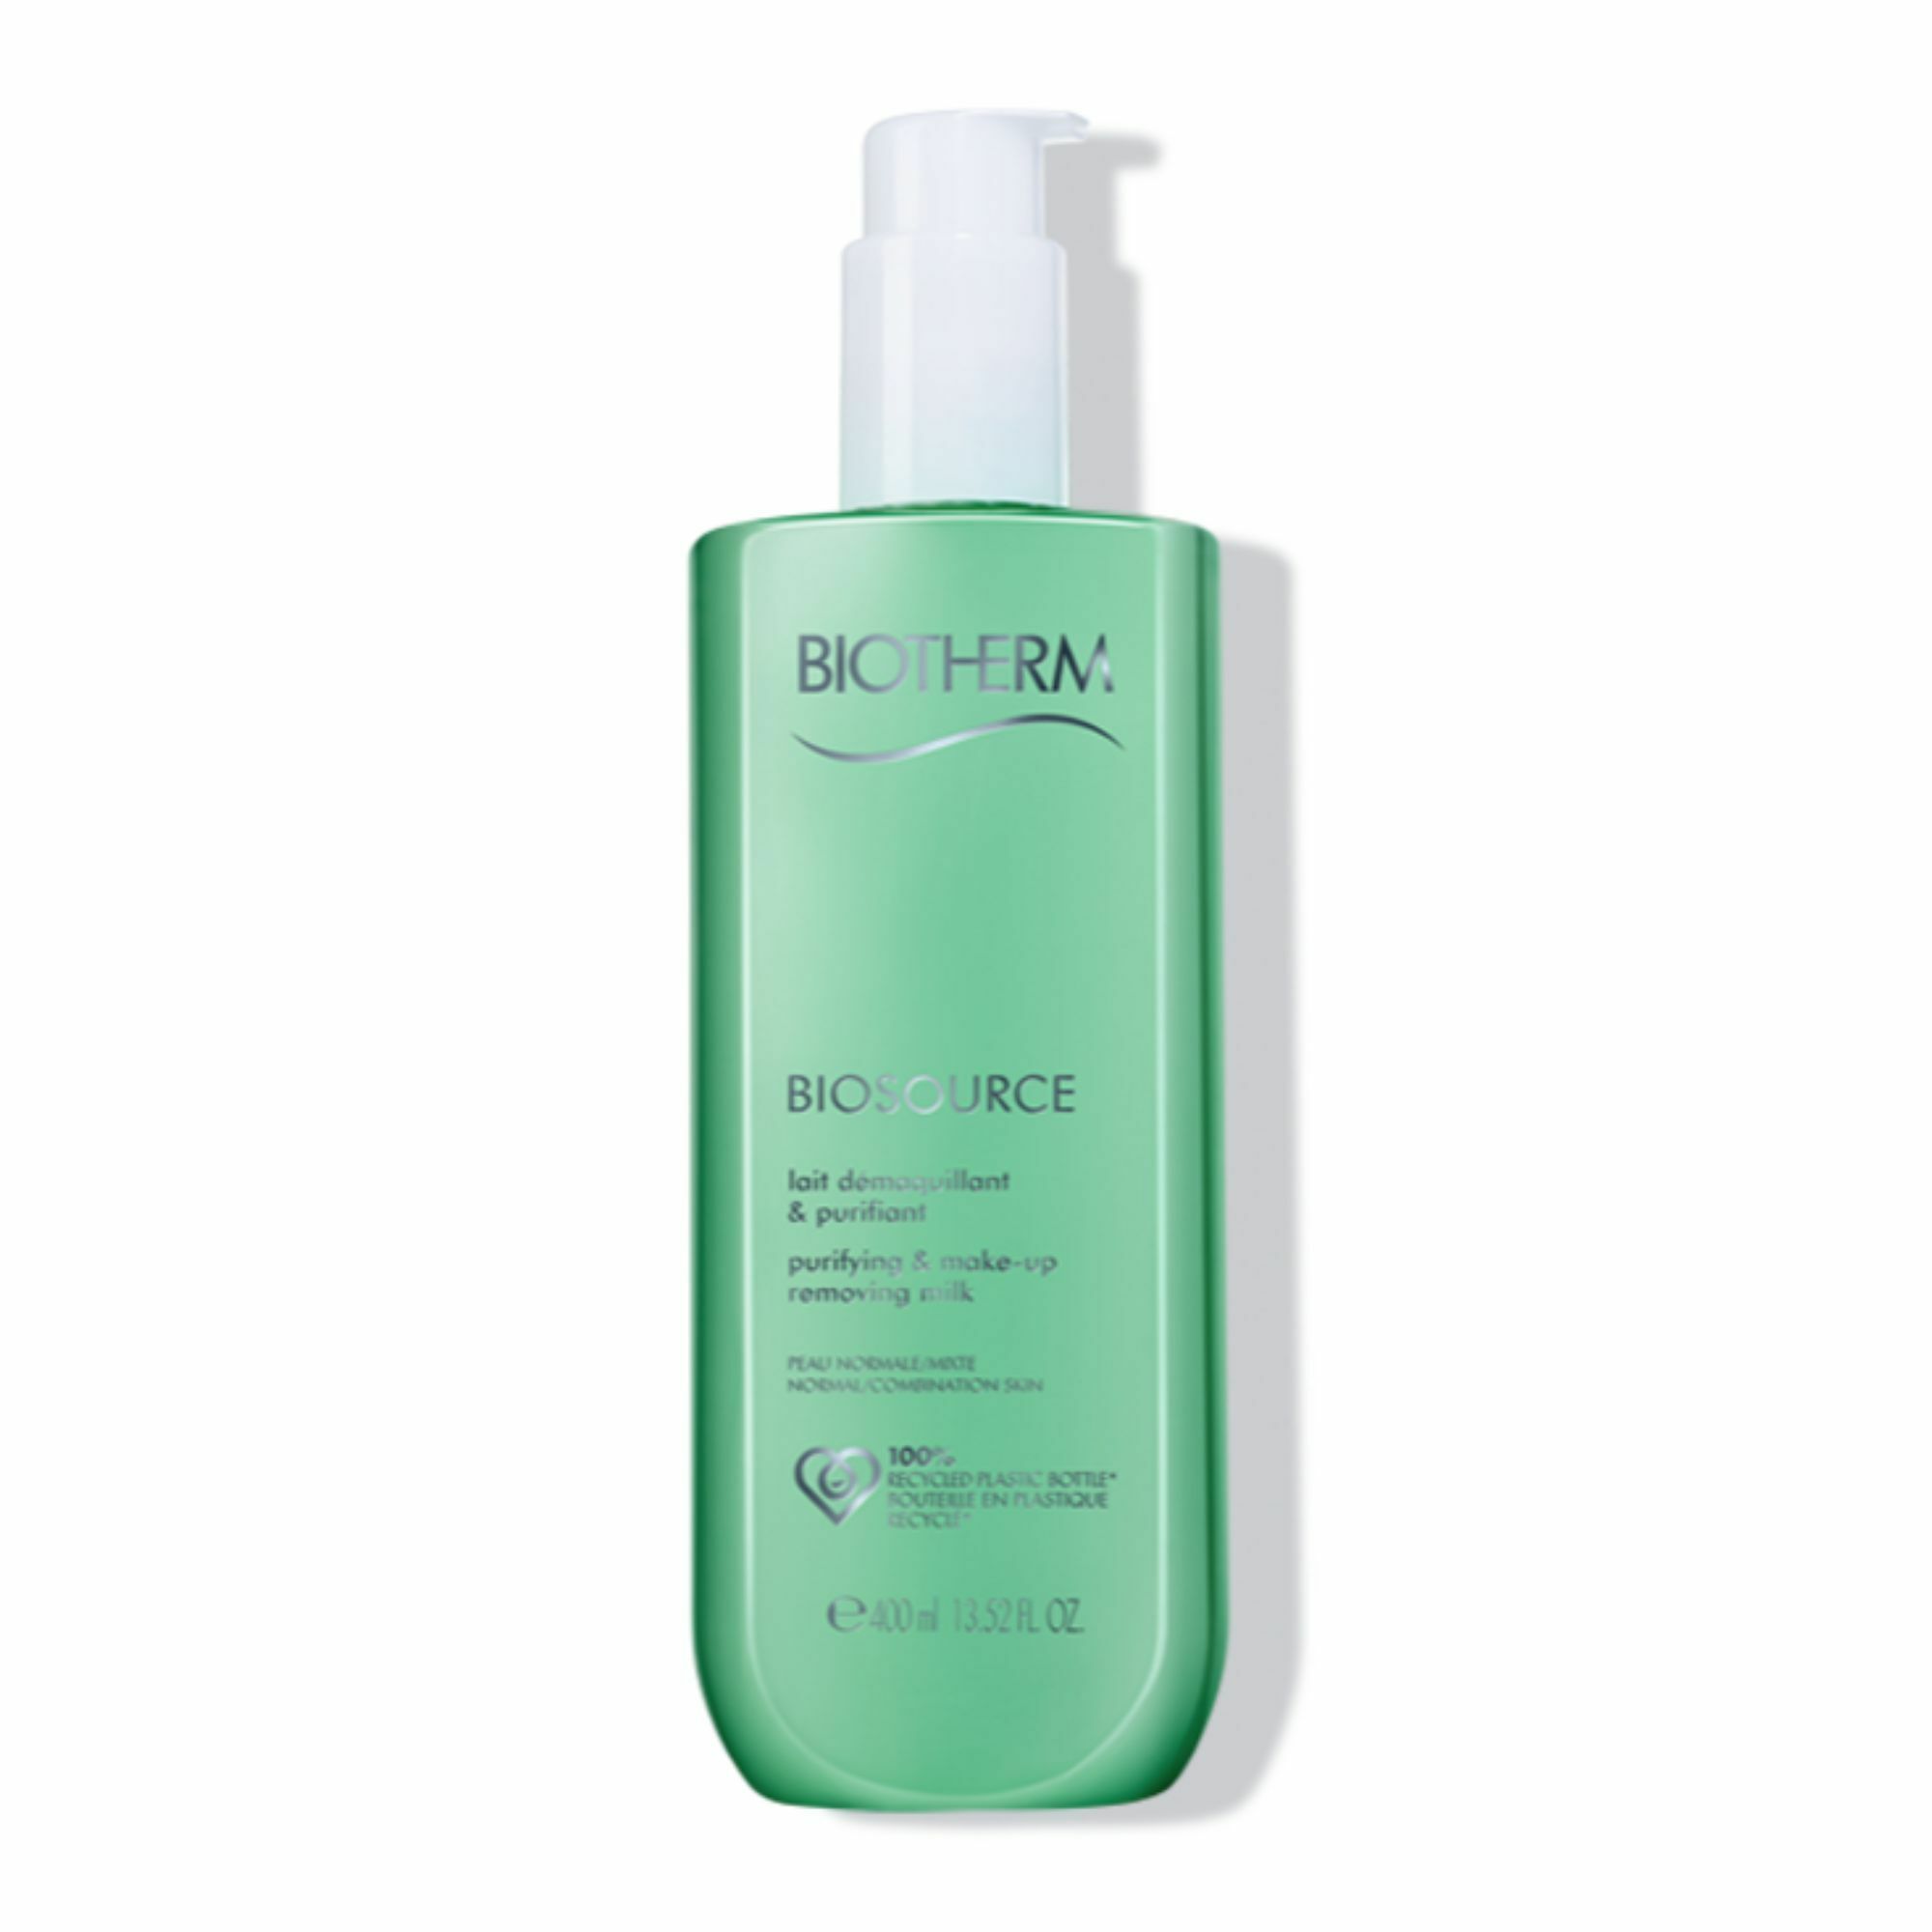 Image of Biotherm Biosource Cleansing & Purifying Milk